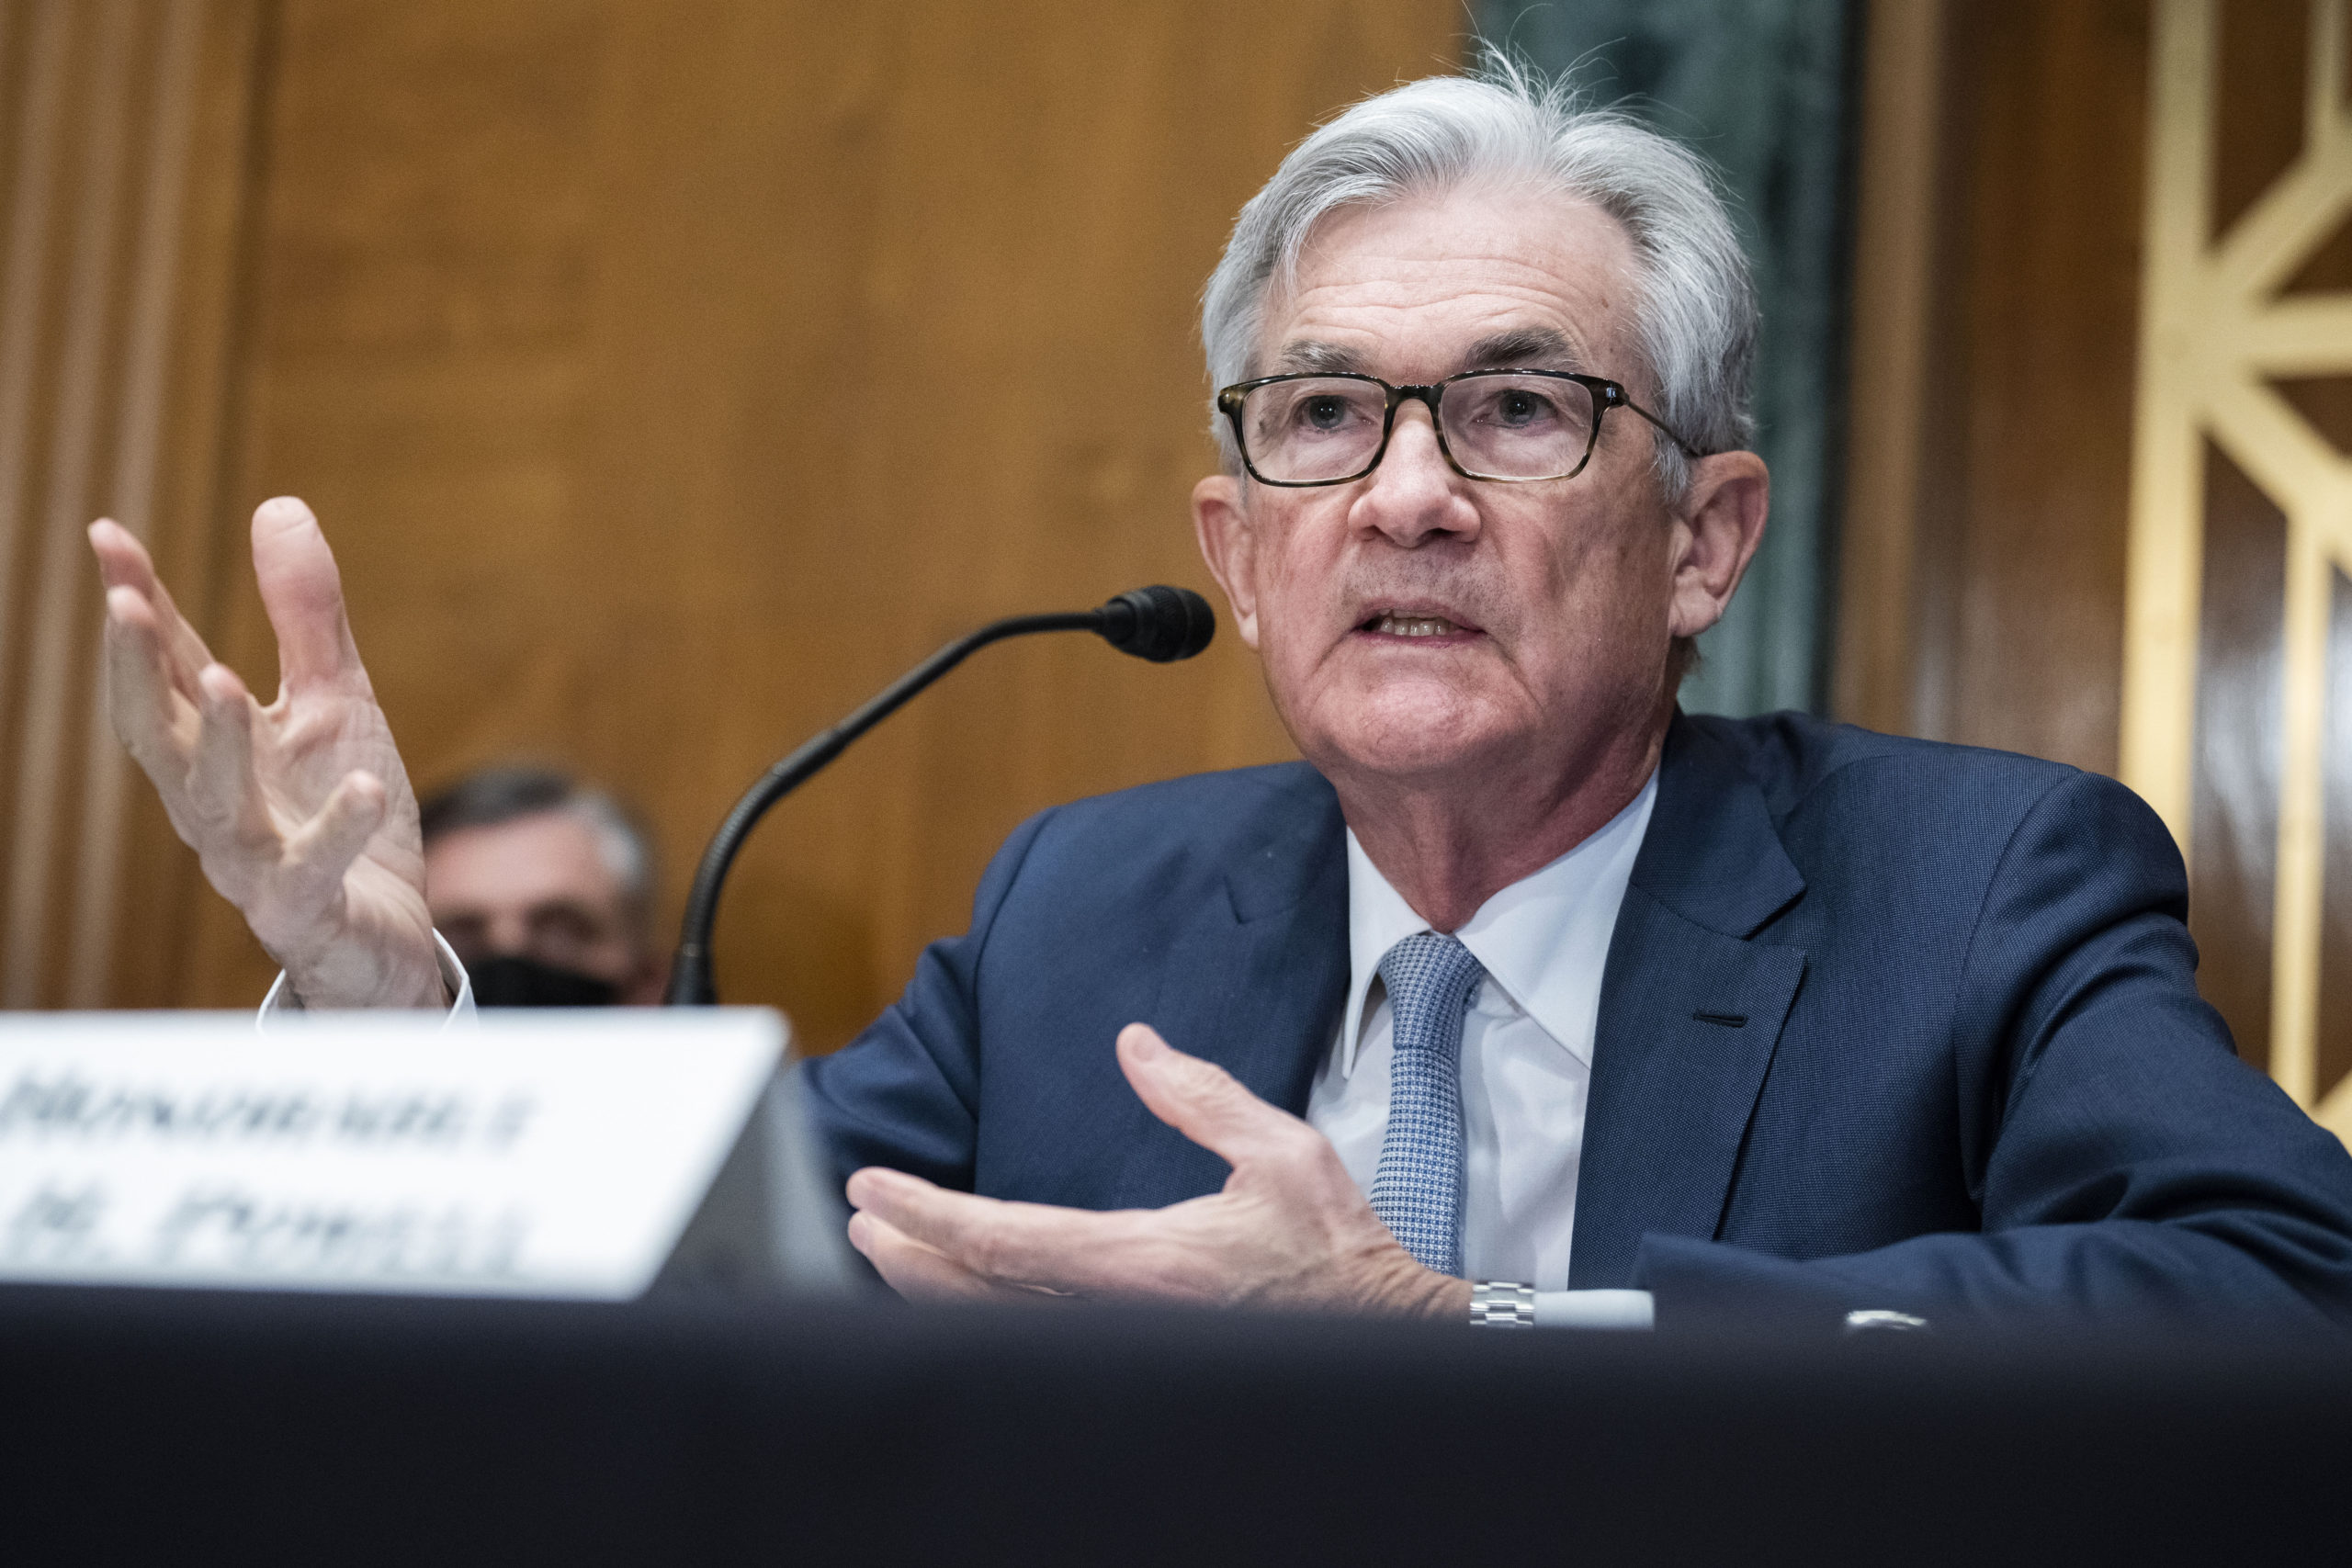 Federal Reserve Chairman Jerome Powell testifies during a Senate Banking Committee hearing on Capitol Hill on Thursday.